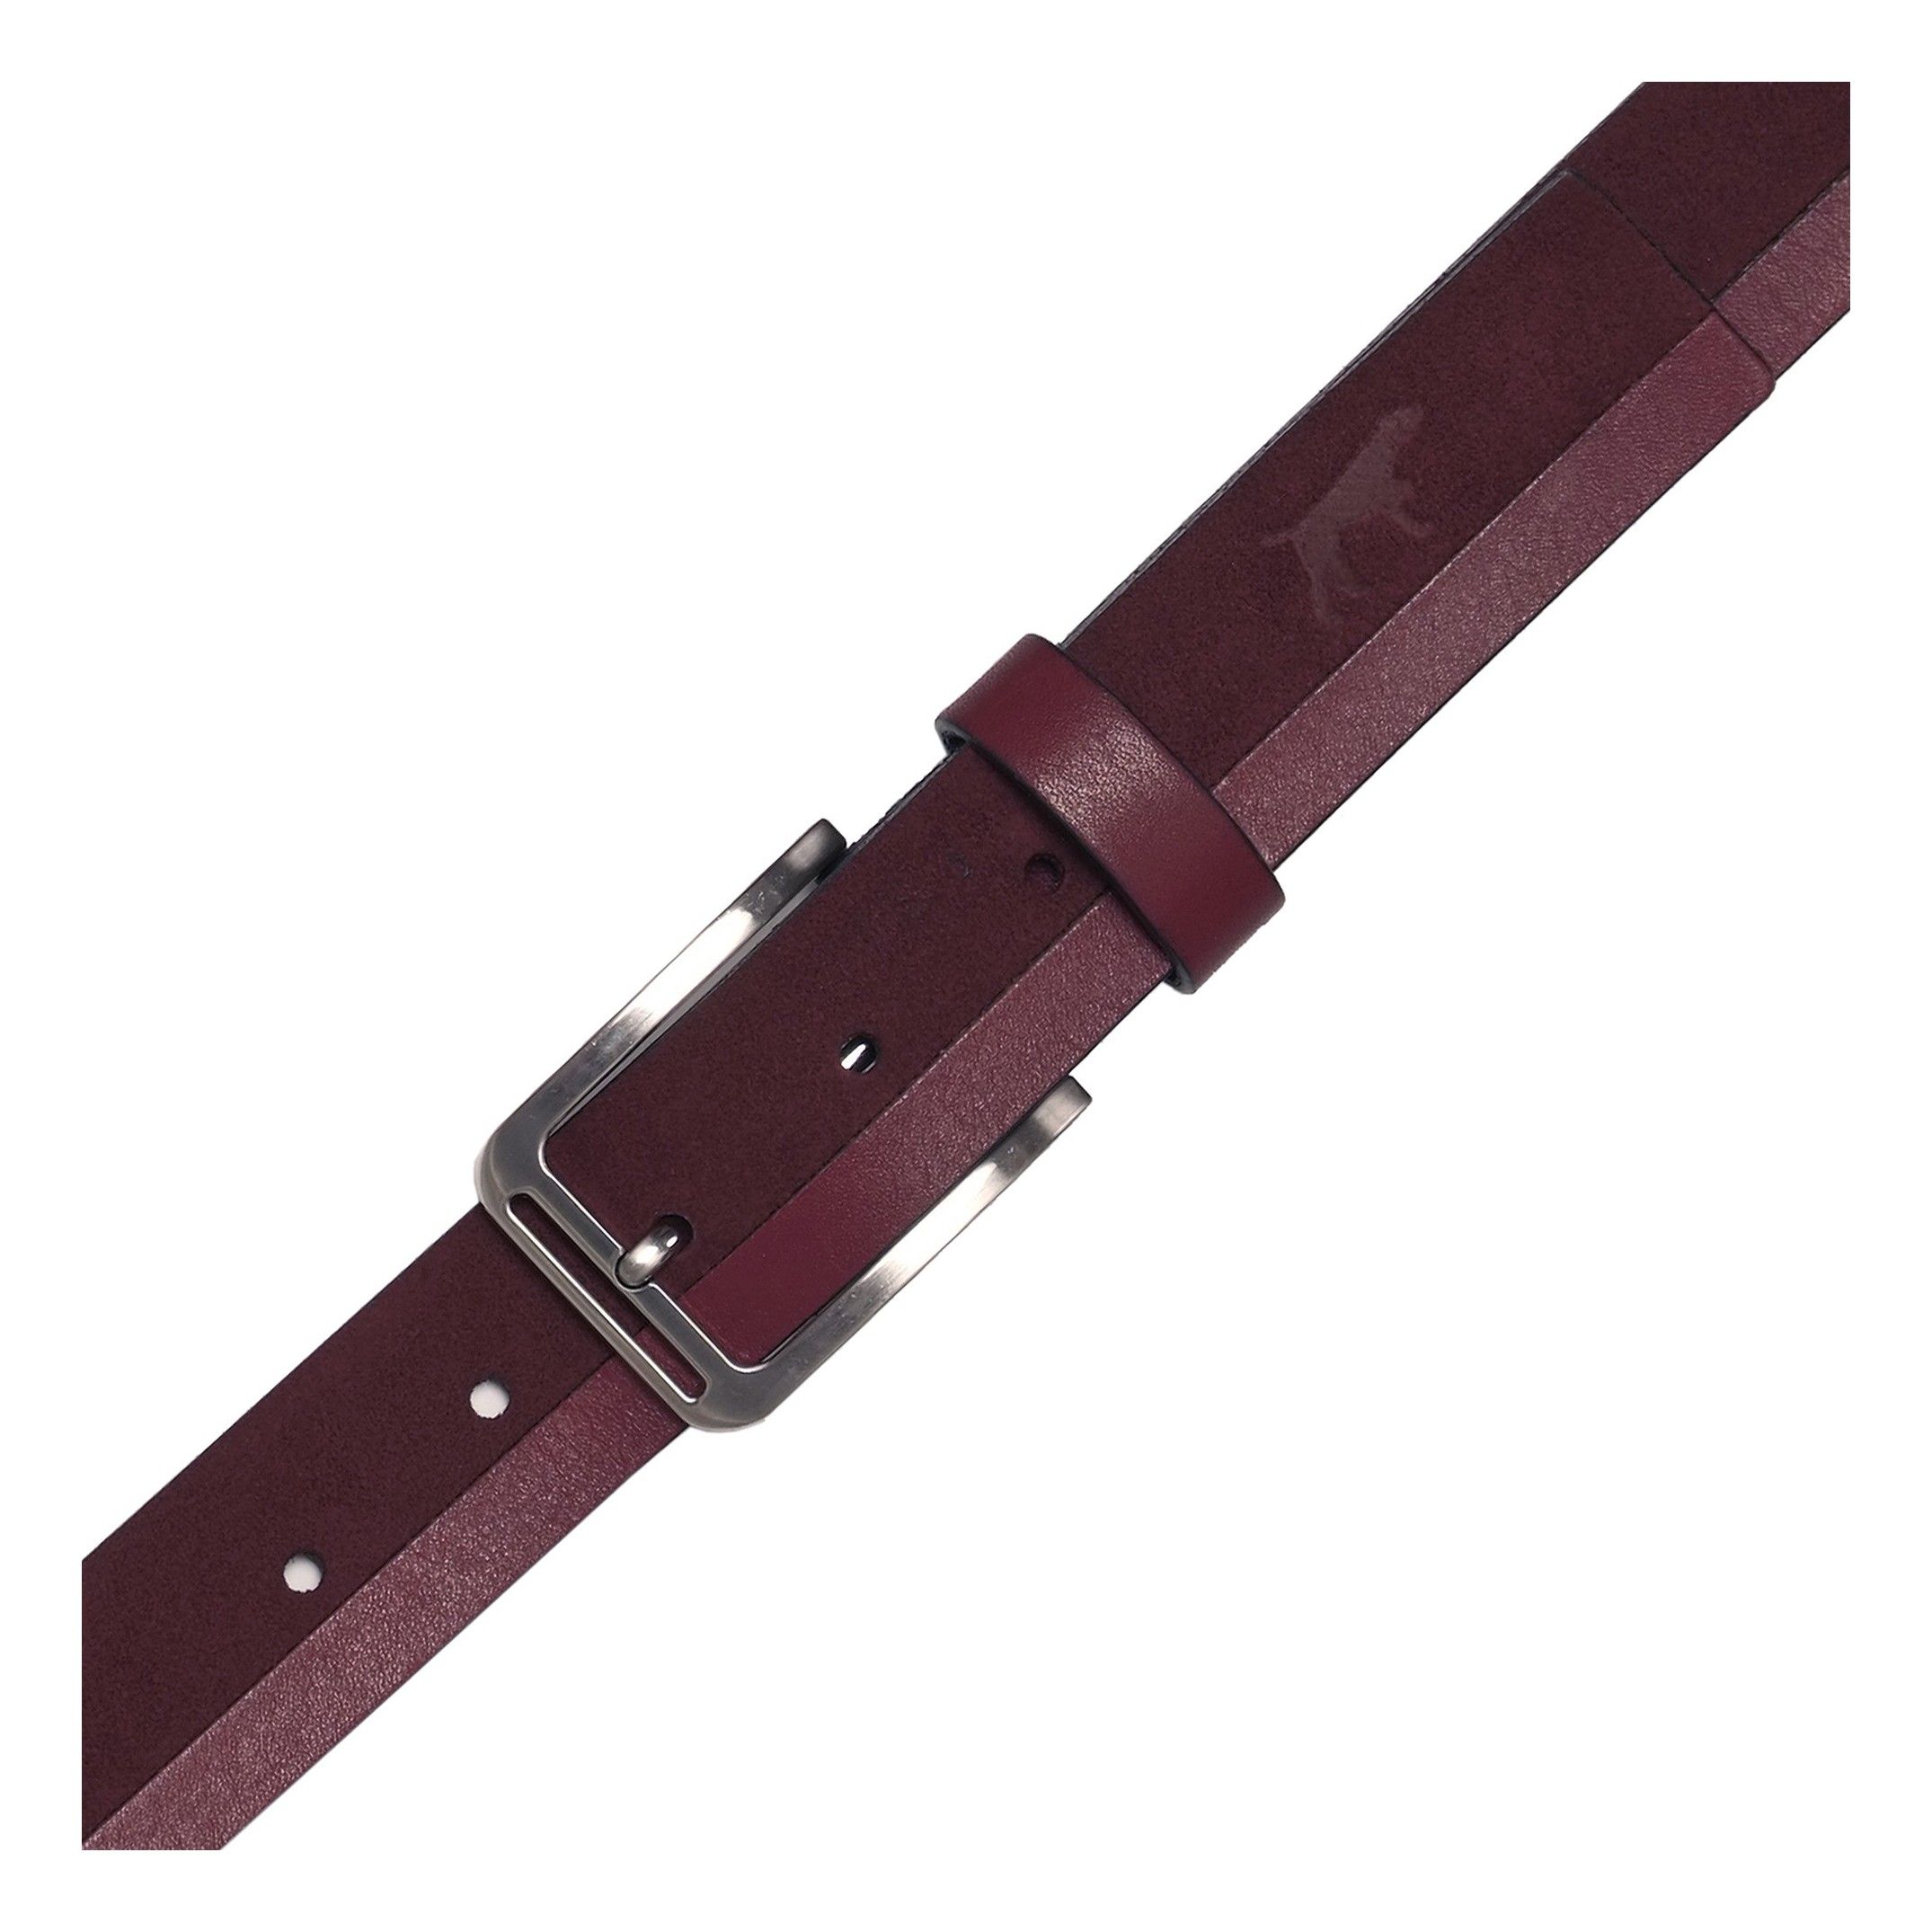 Adjustable belt. Classic leather. Removable metal buckle to adapt the belt. Width of 3,5 cm. Large of 100 cm & 115 cm. Burgundy color. Classic style.